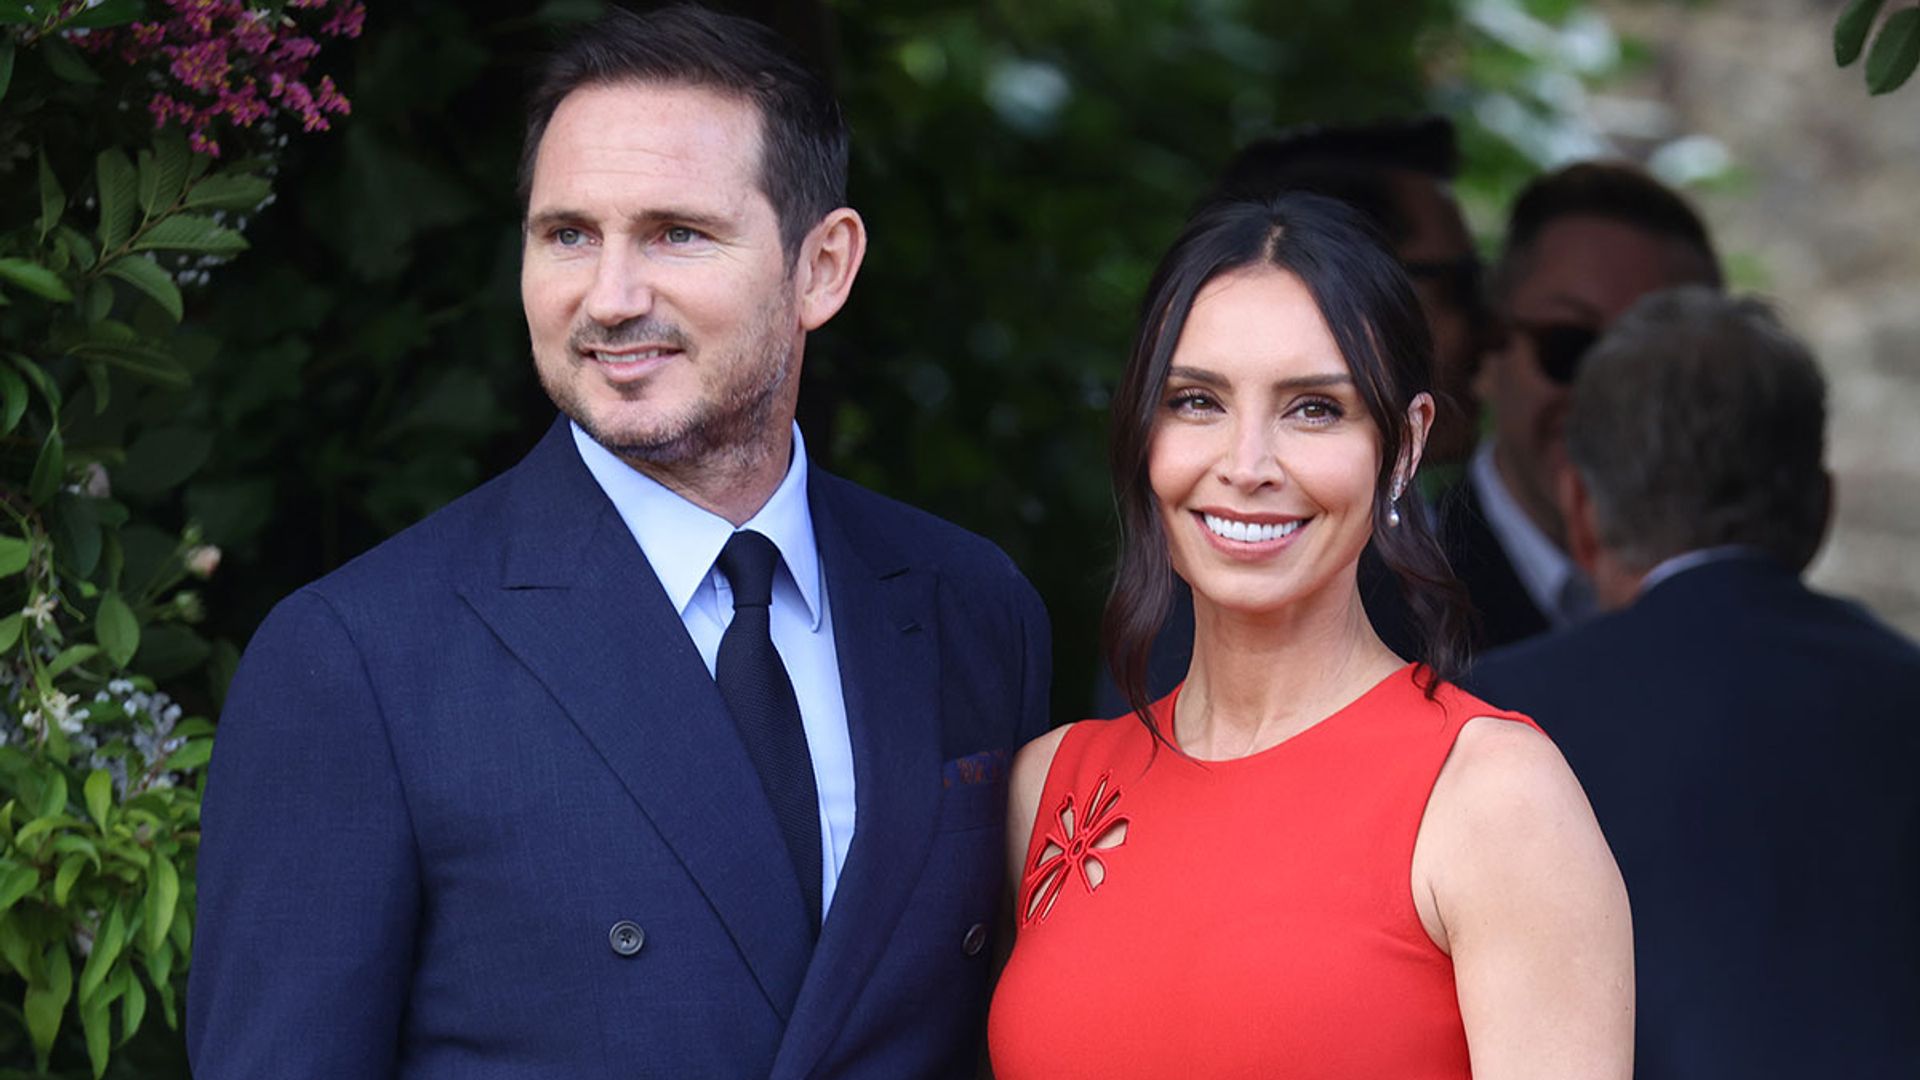 Christine Lampard shares glimpse inside 6th wedding anniversary celebrations with husband Frank